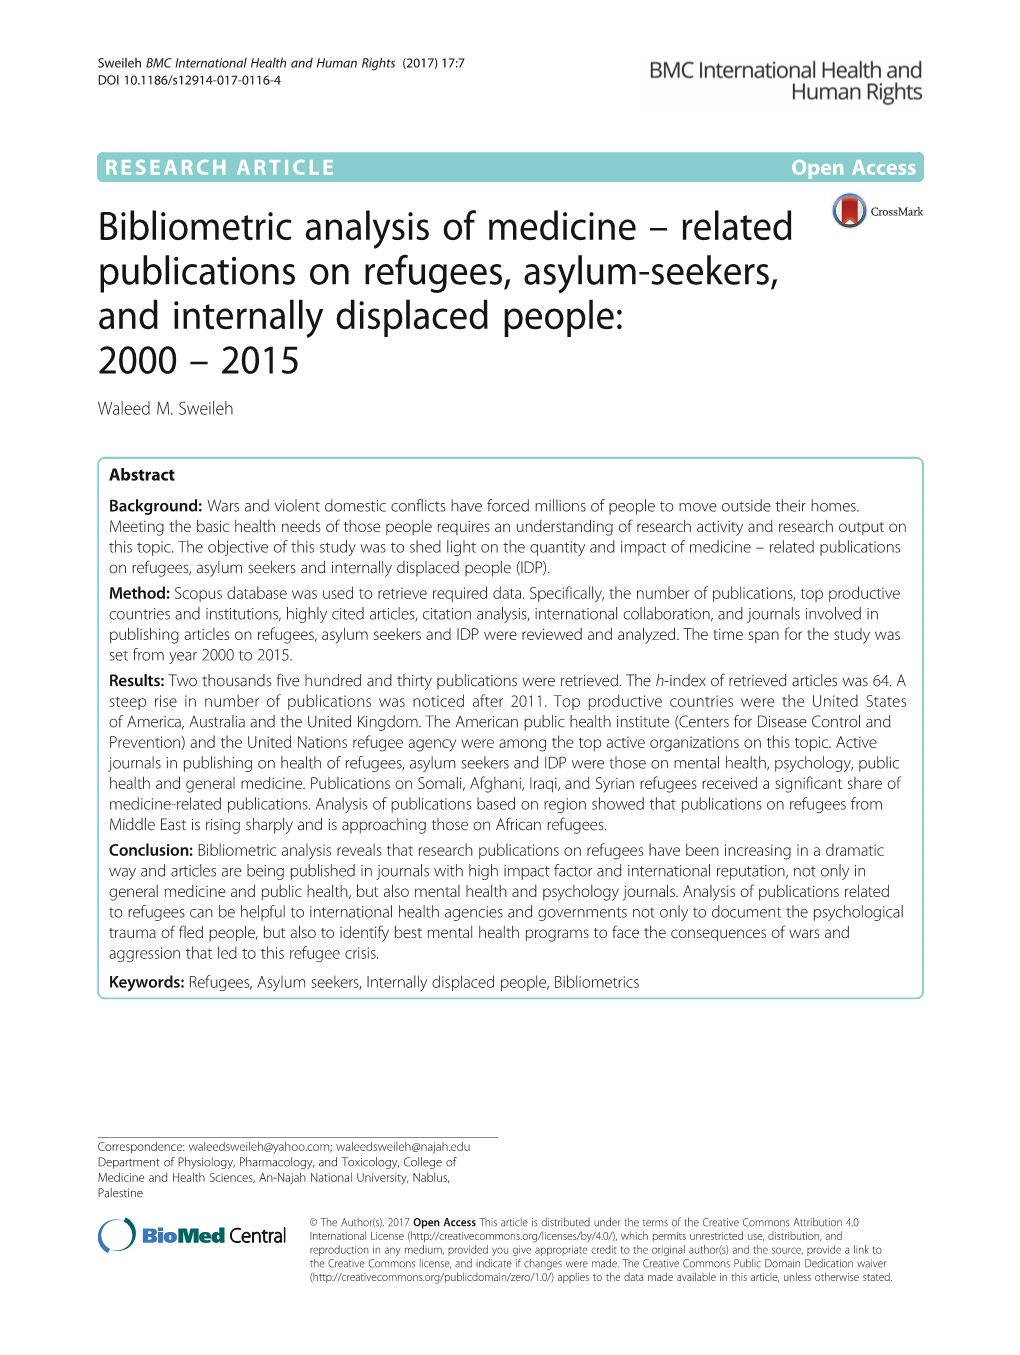 Related Publications on Refugees, Asylum-Seekers, and Internally Displaced People: 2000 – 2015 Waleed M